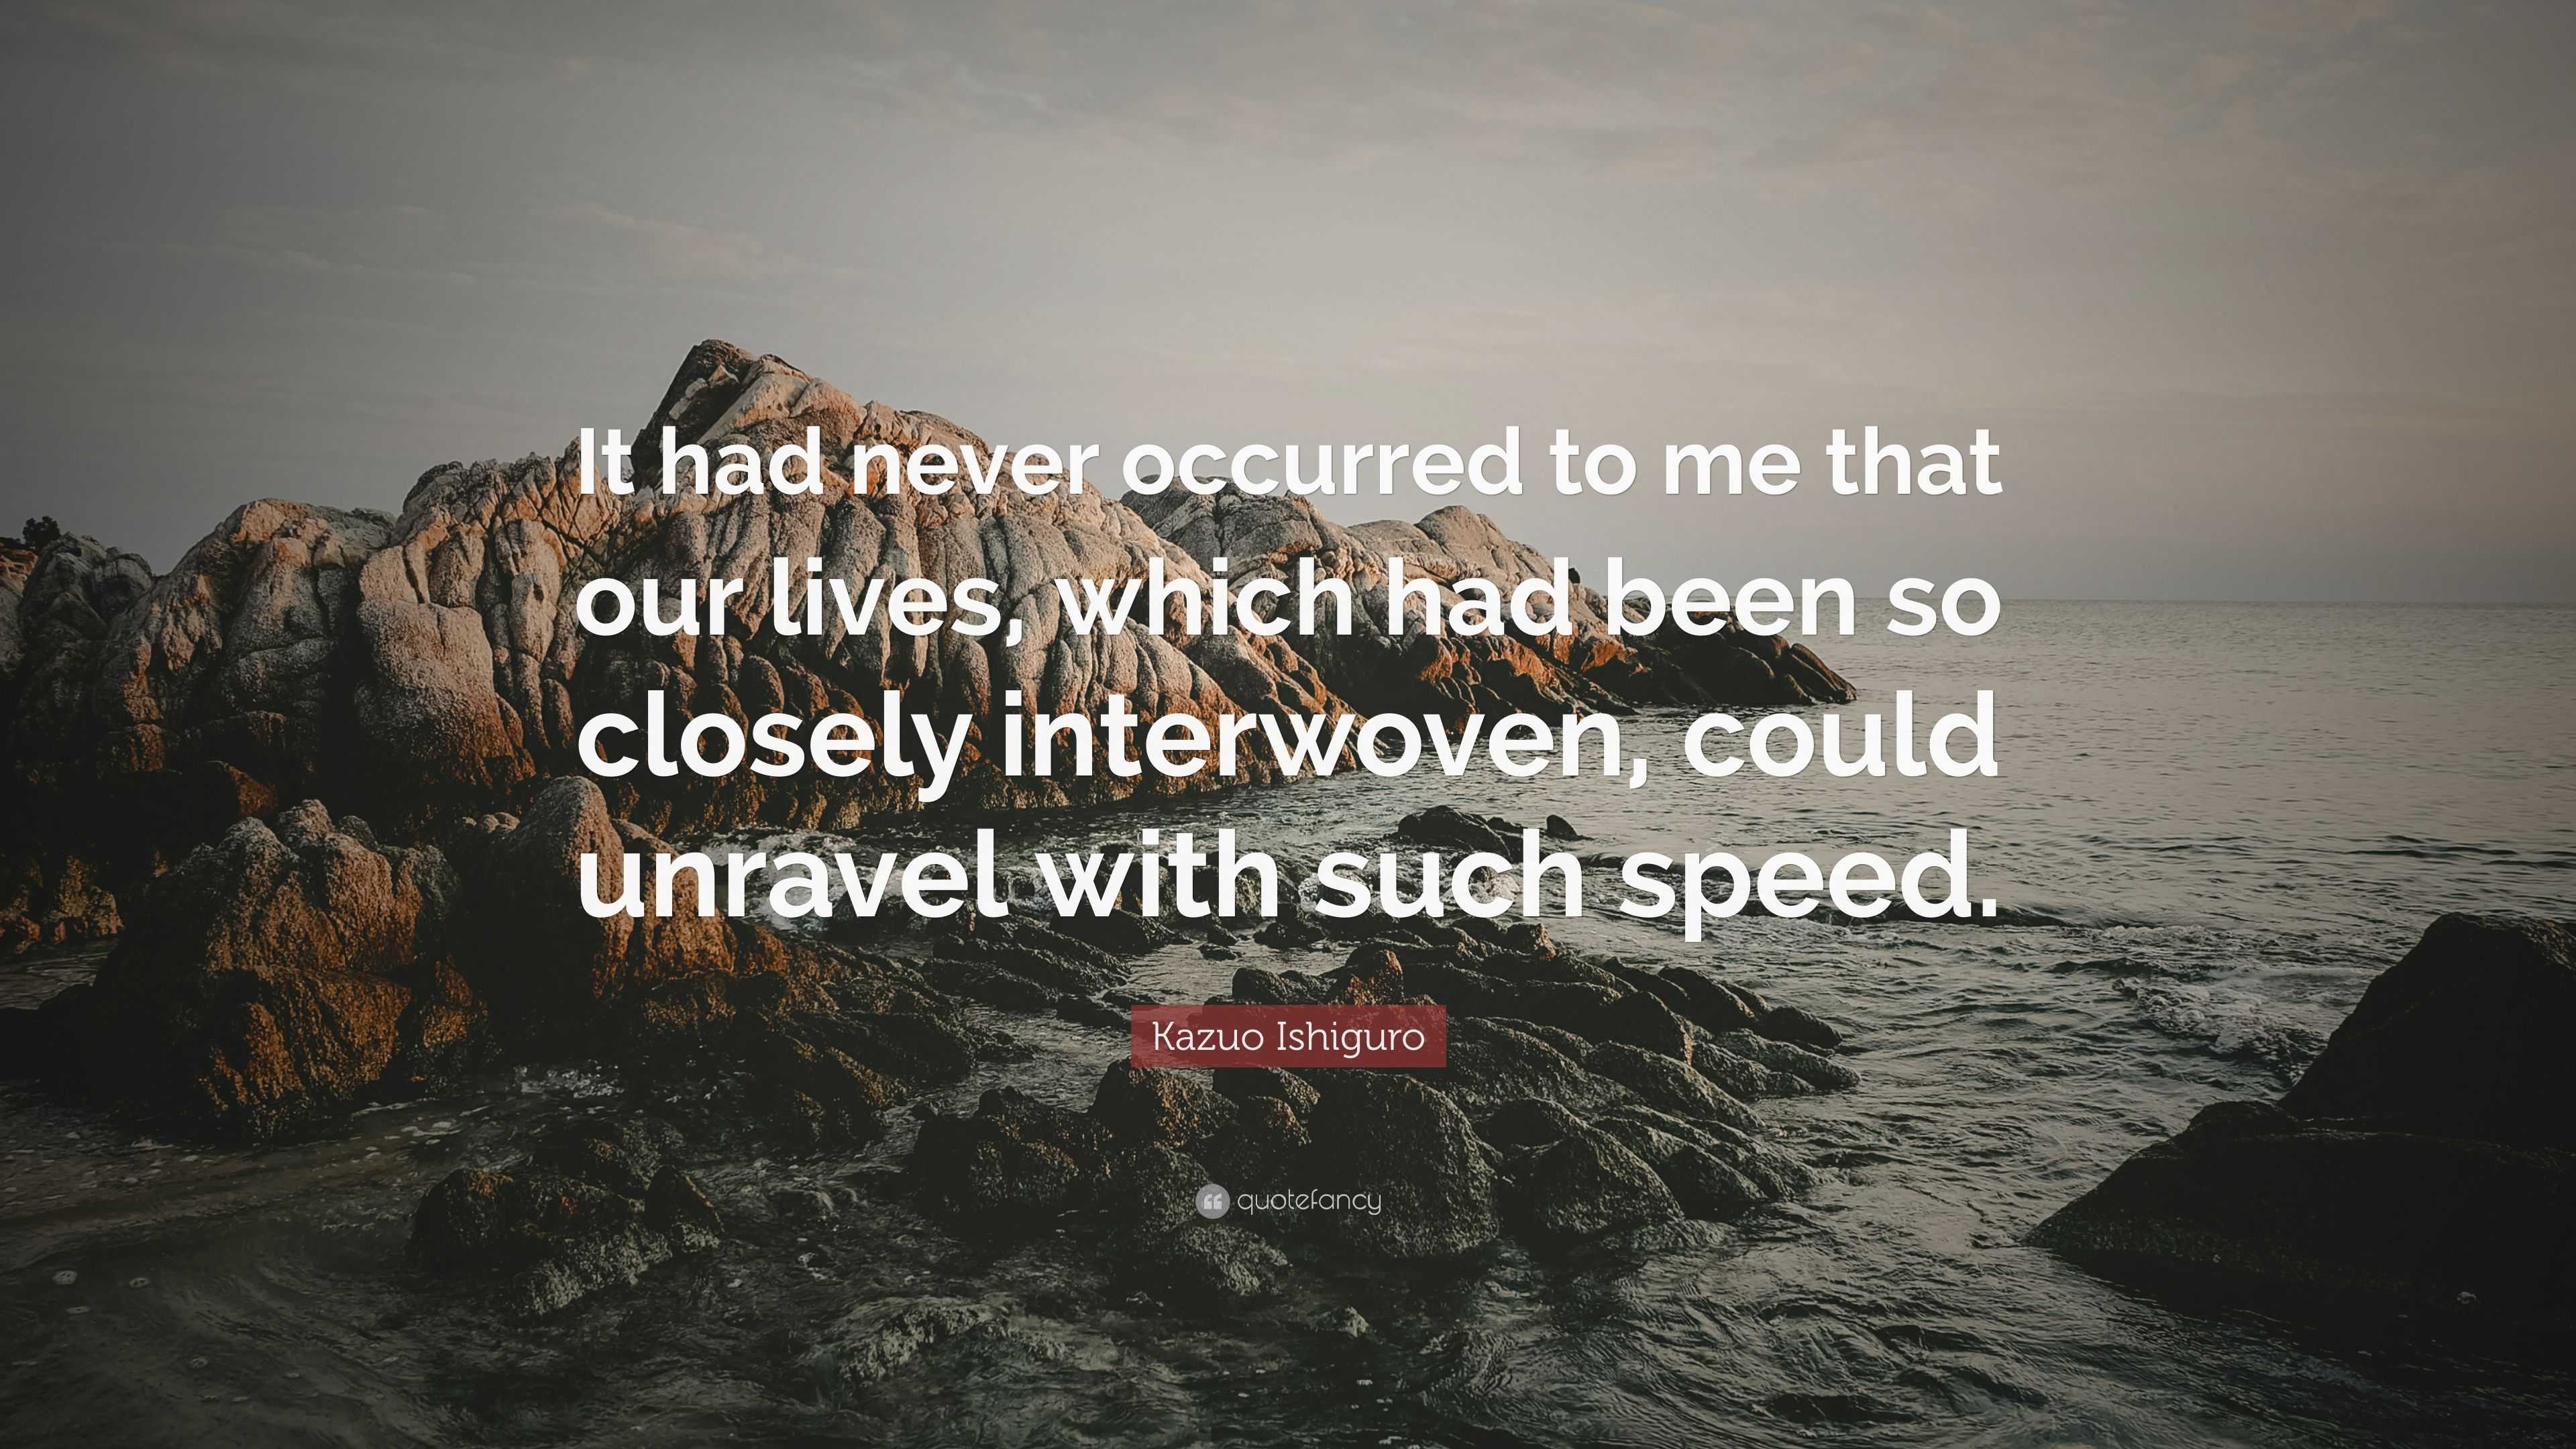 Kazuo Ishiguro Quote: “It had never occurred to me that our lives ...